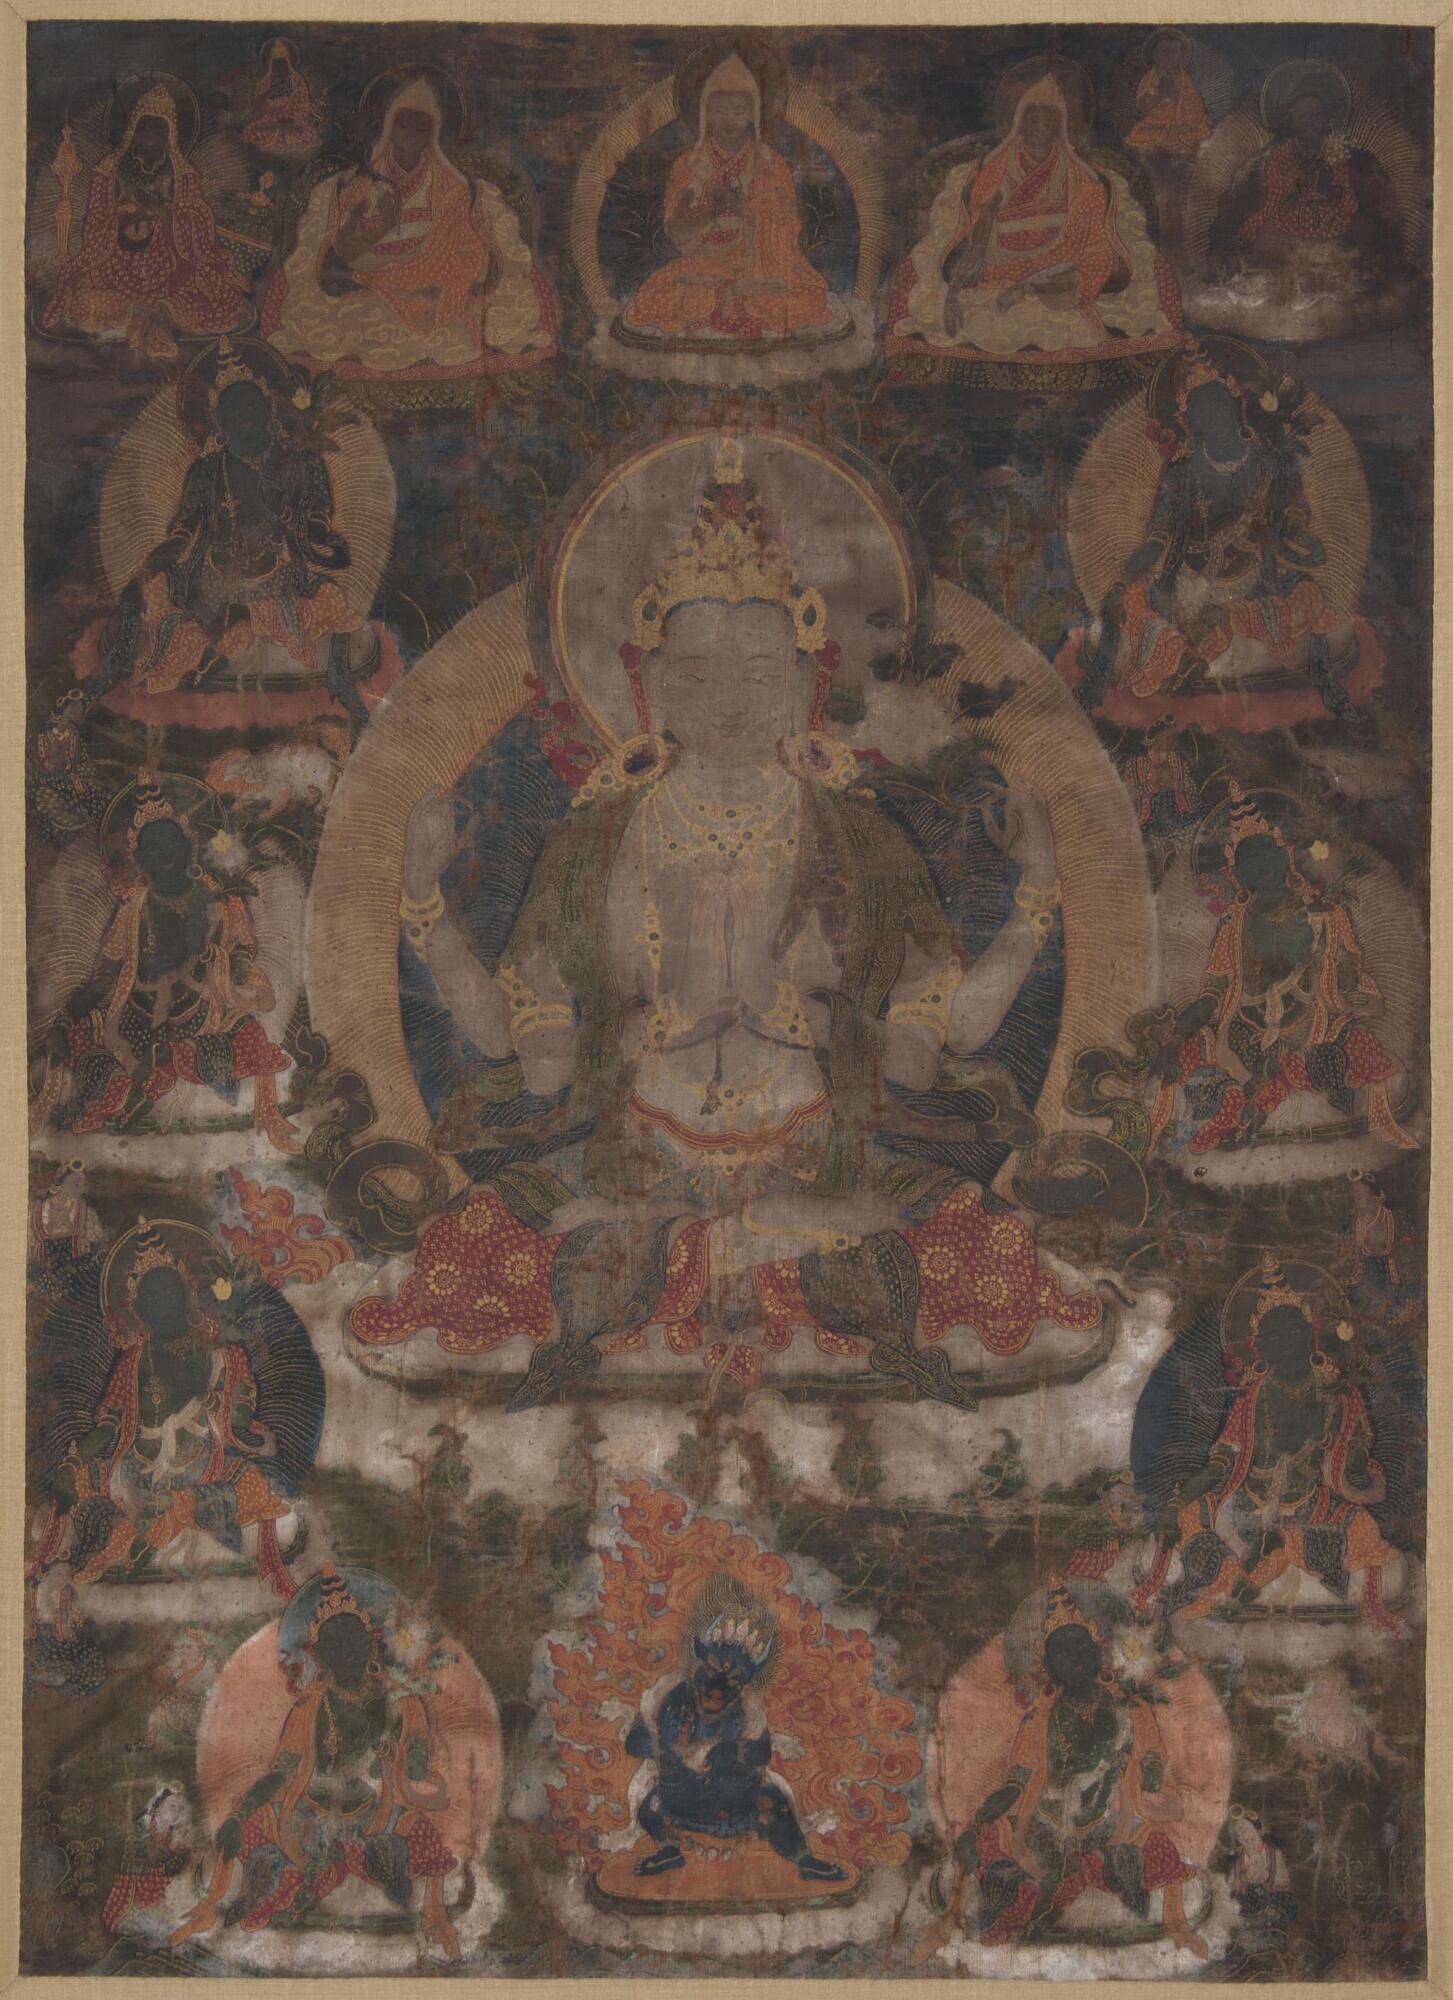 A silk hanging scroll with images of members of a pantheon of gods.